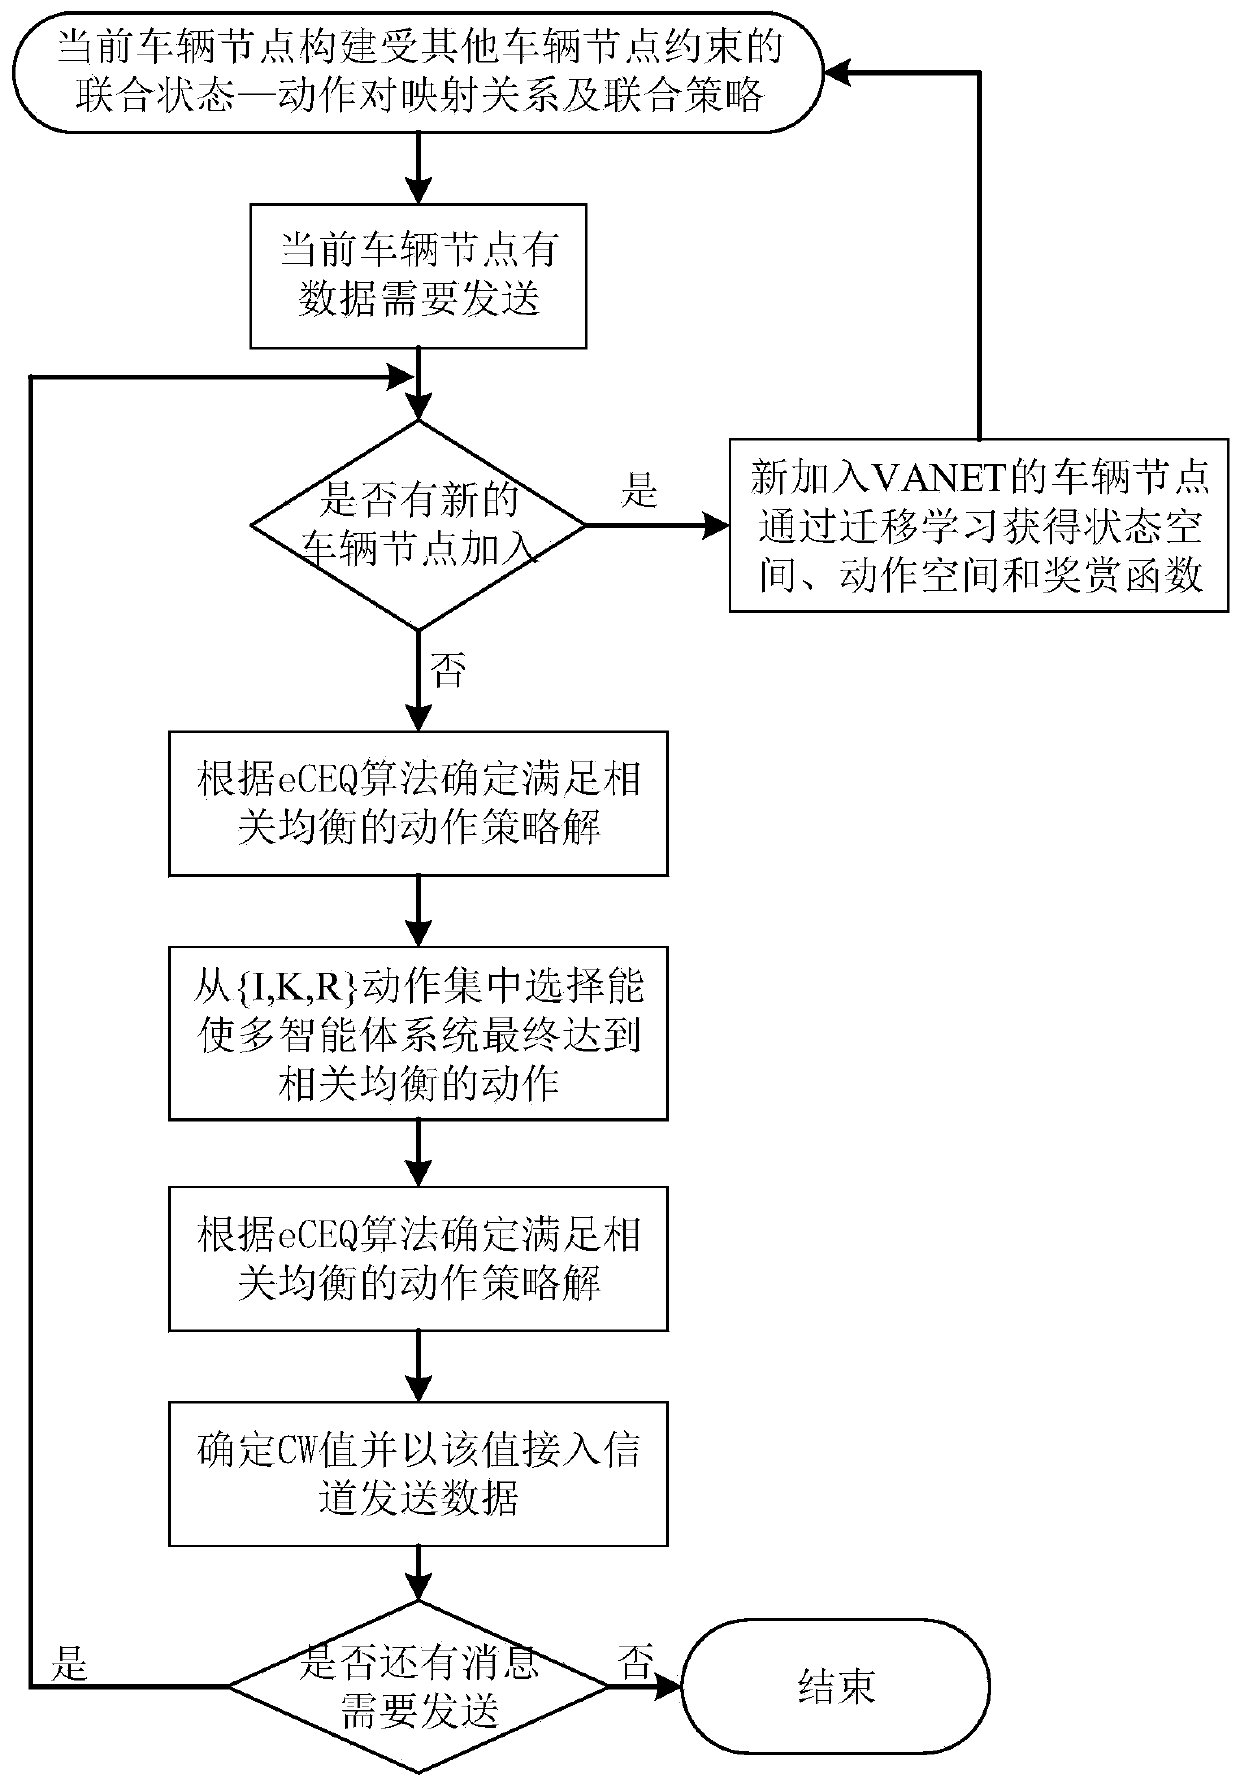 A multi-agent q-learning based channel access method for MAC layer in vehicle communication